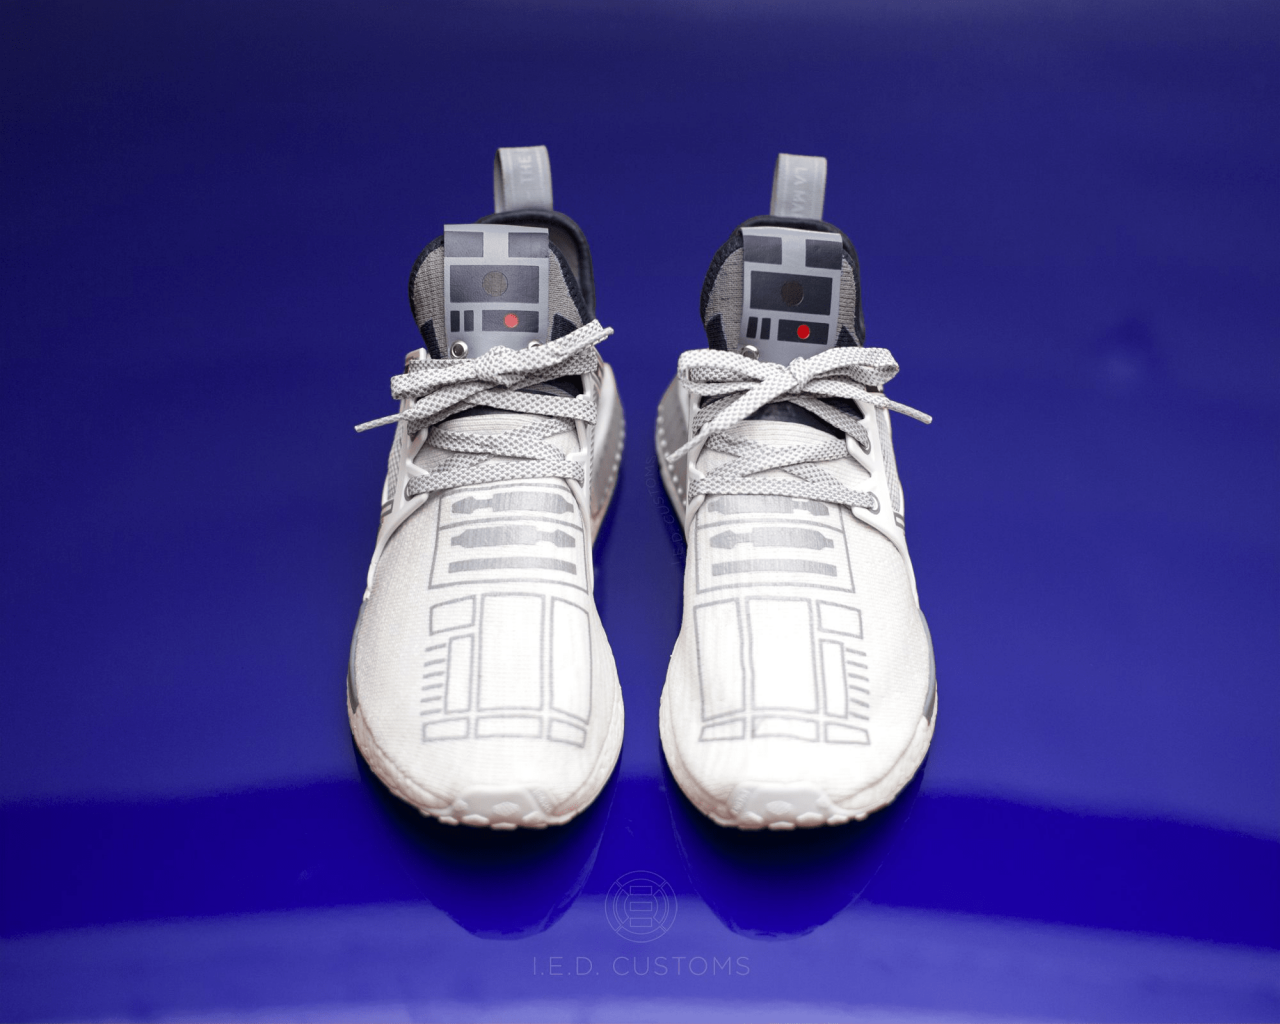 Innovated Elemental Designs (IED) R2D2 NMDs